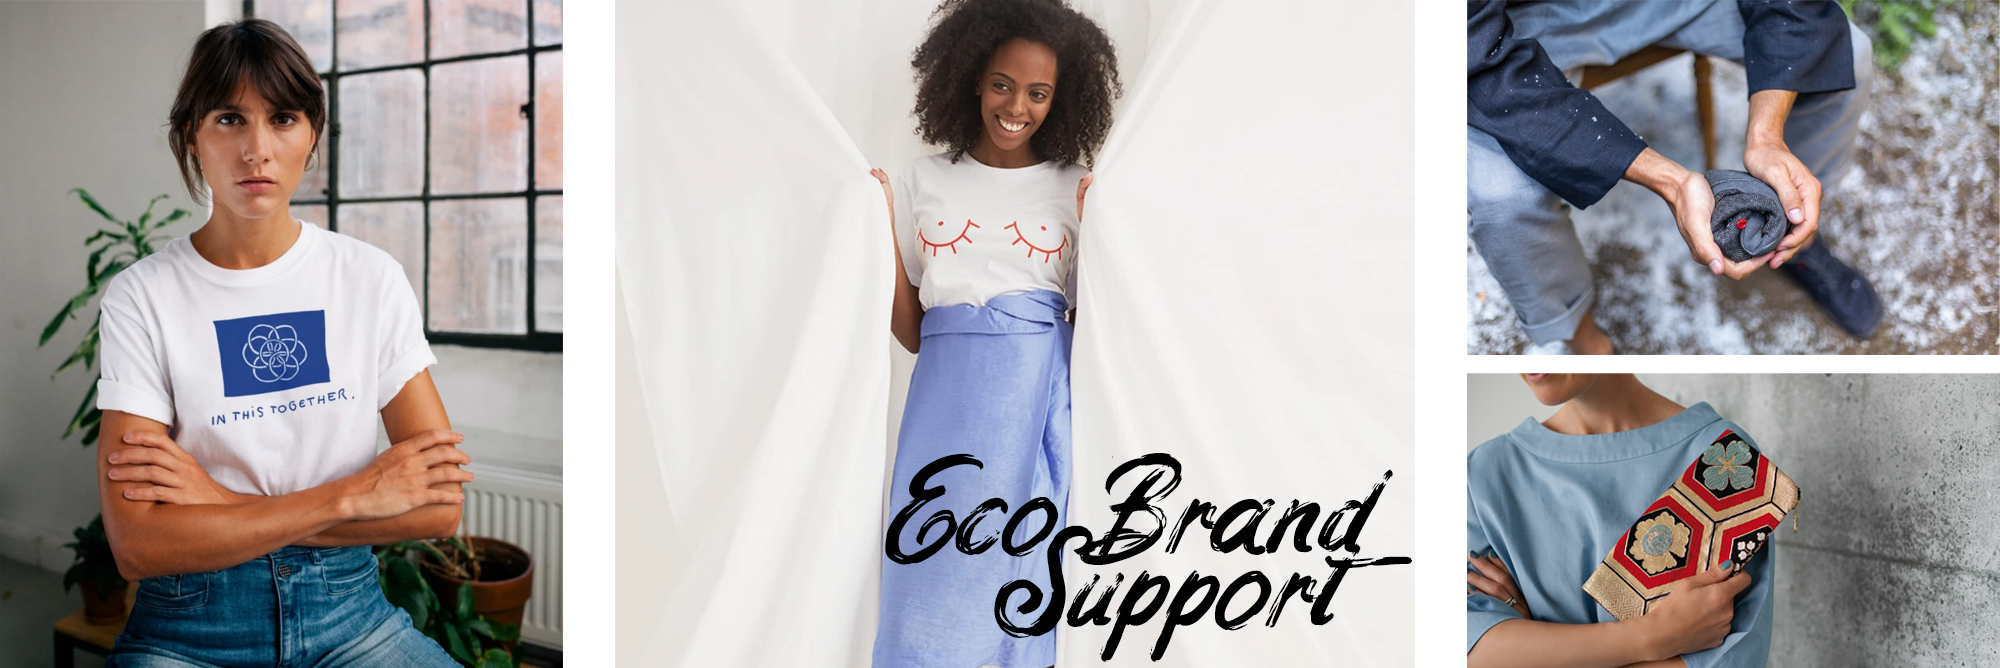 Eco Brand Support: Onlineshopping